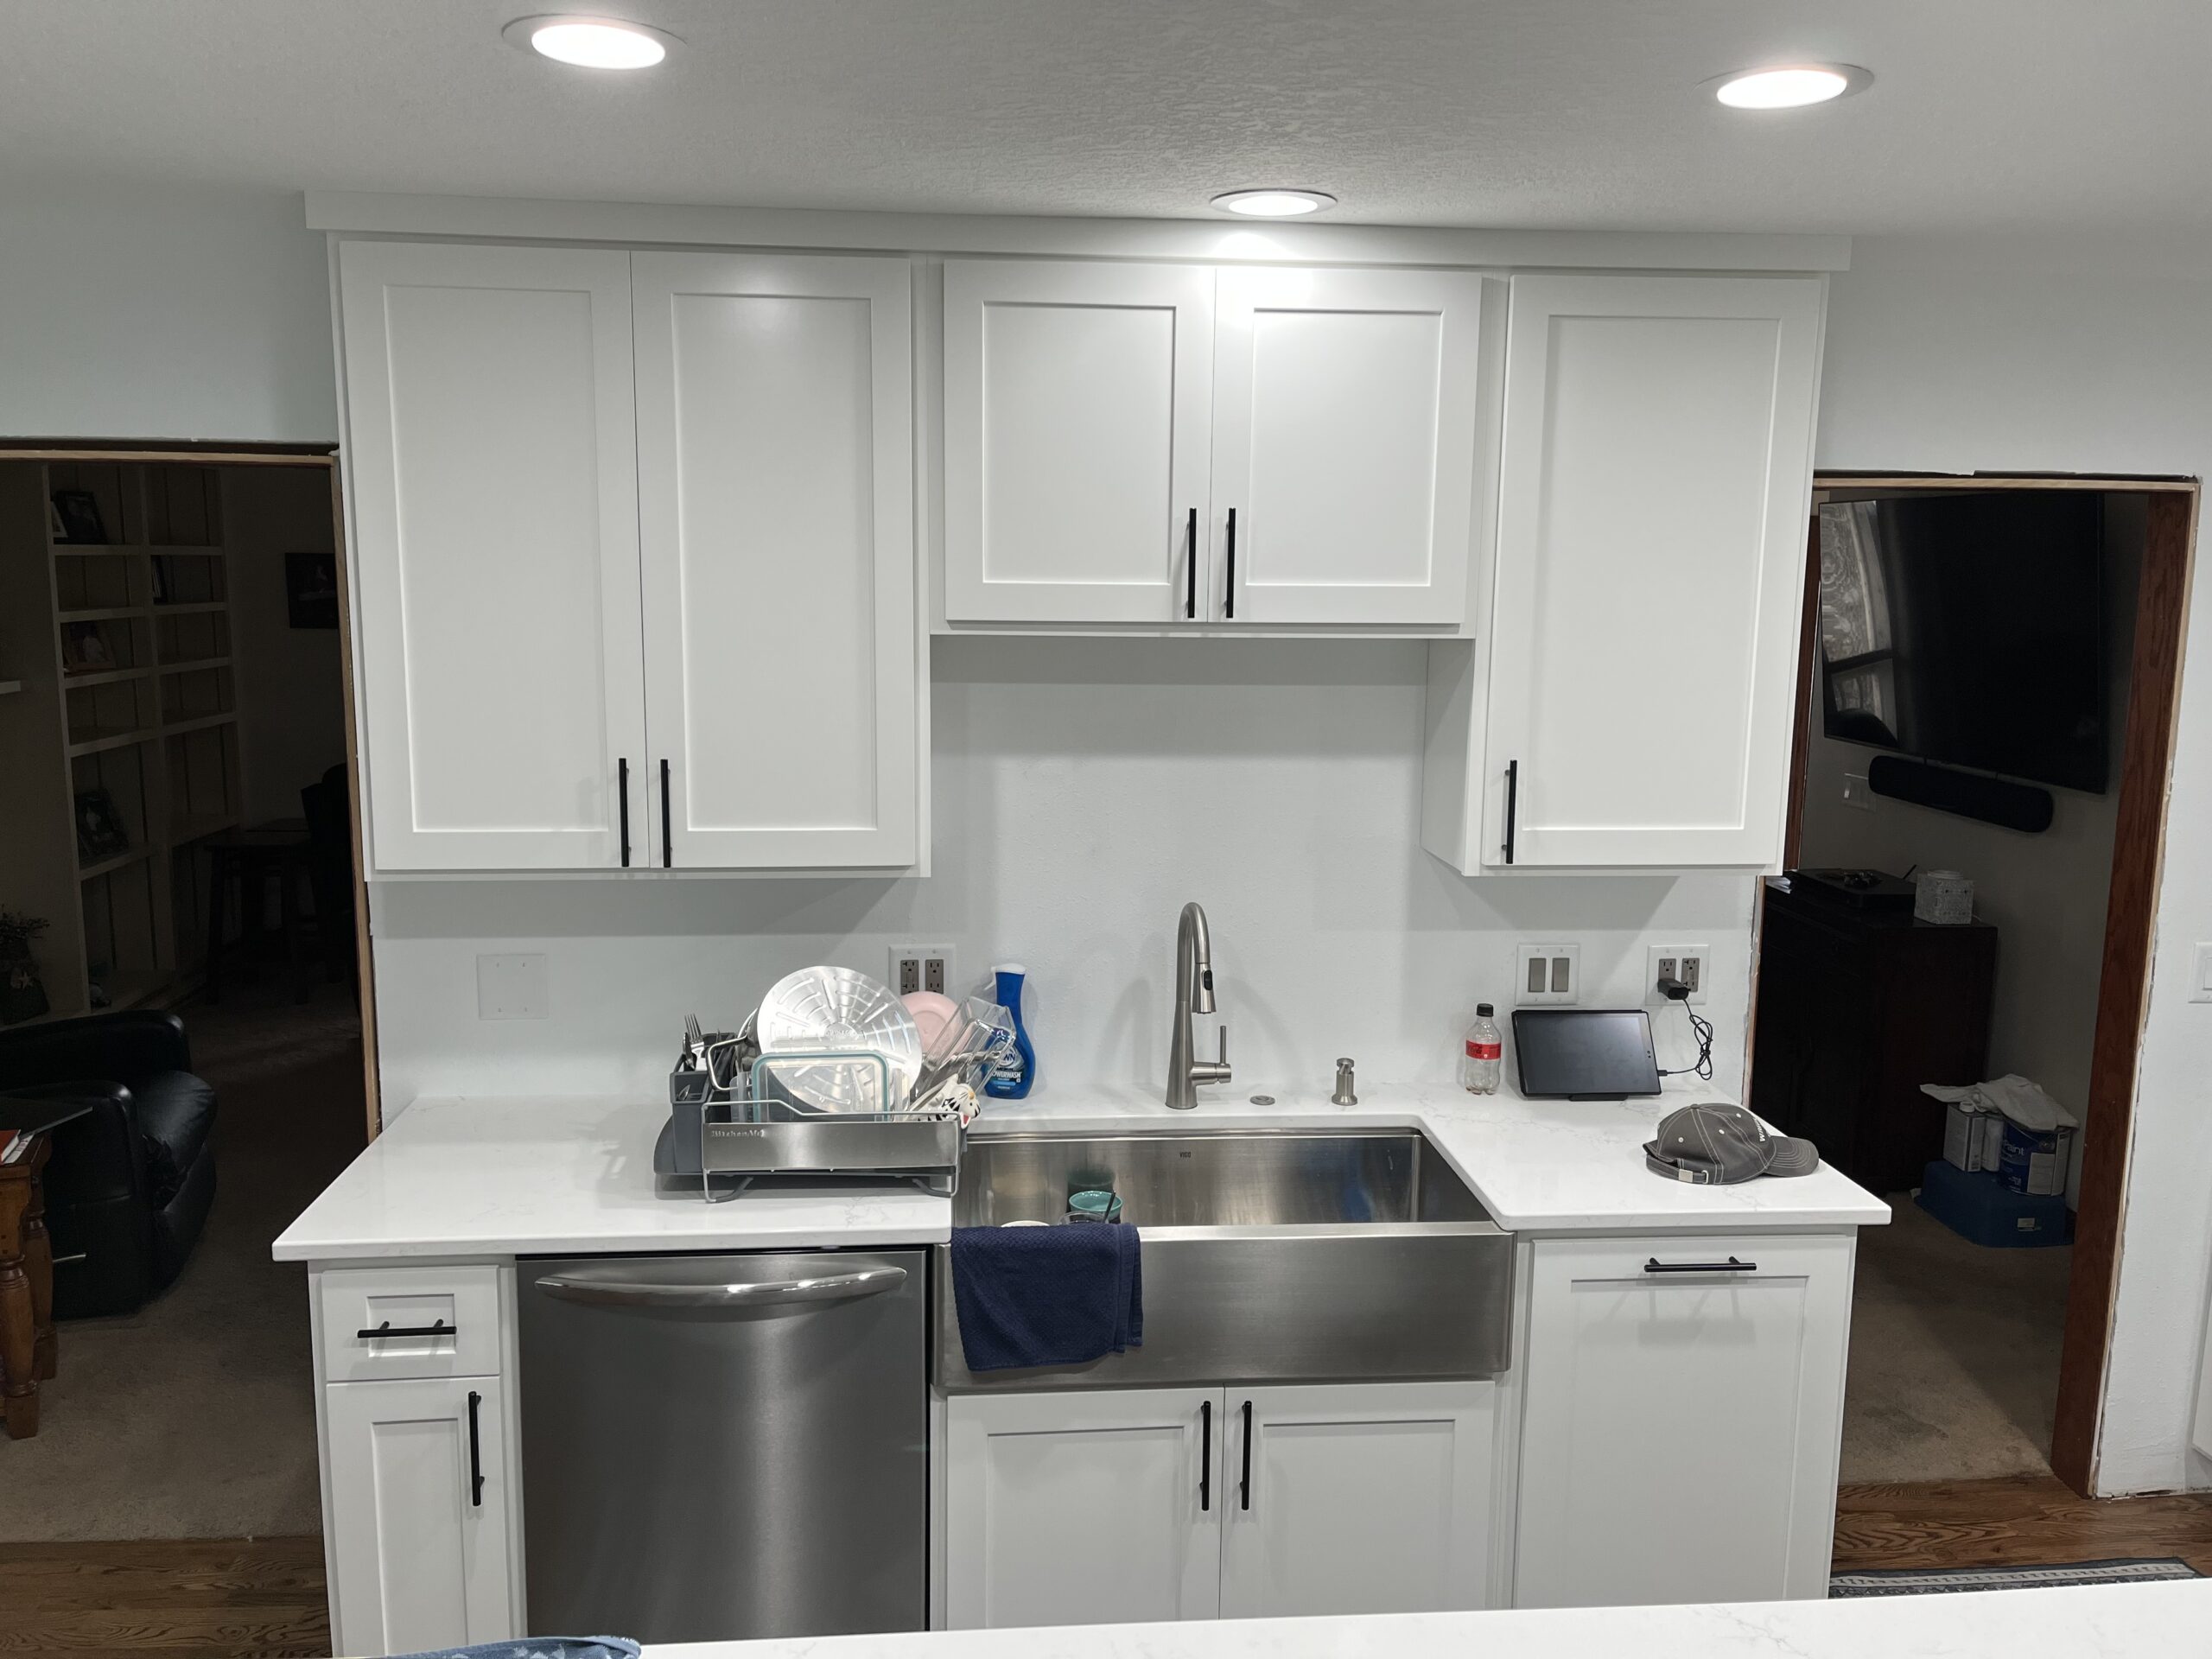 Maximizing Small Spaces: Innovative Custom Cabinetry Solutions for Your Des Moines Kitchen